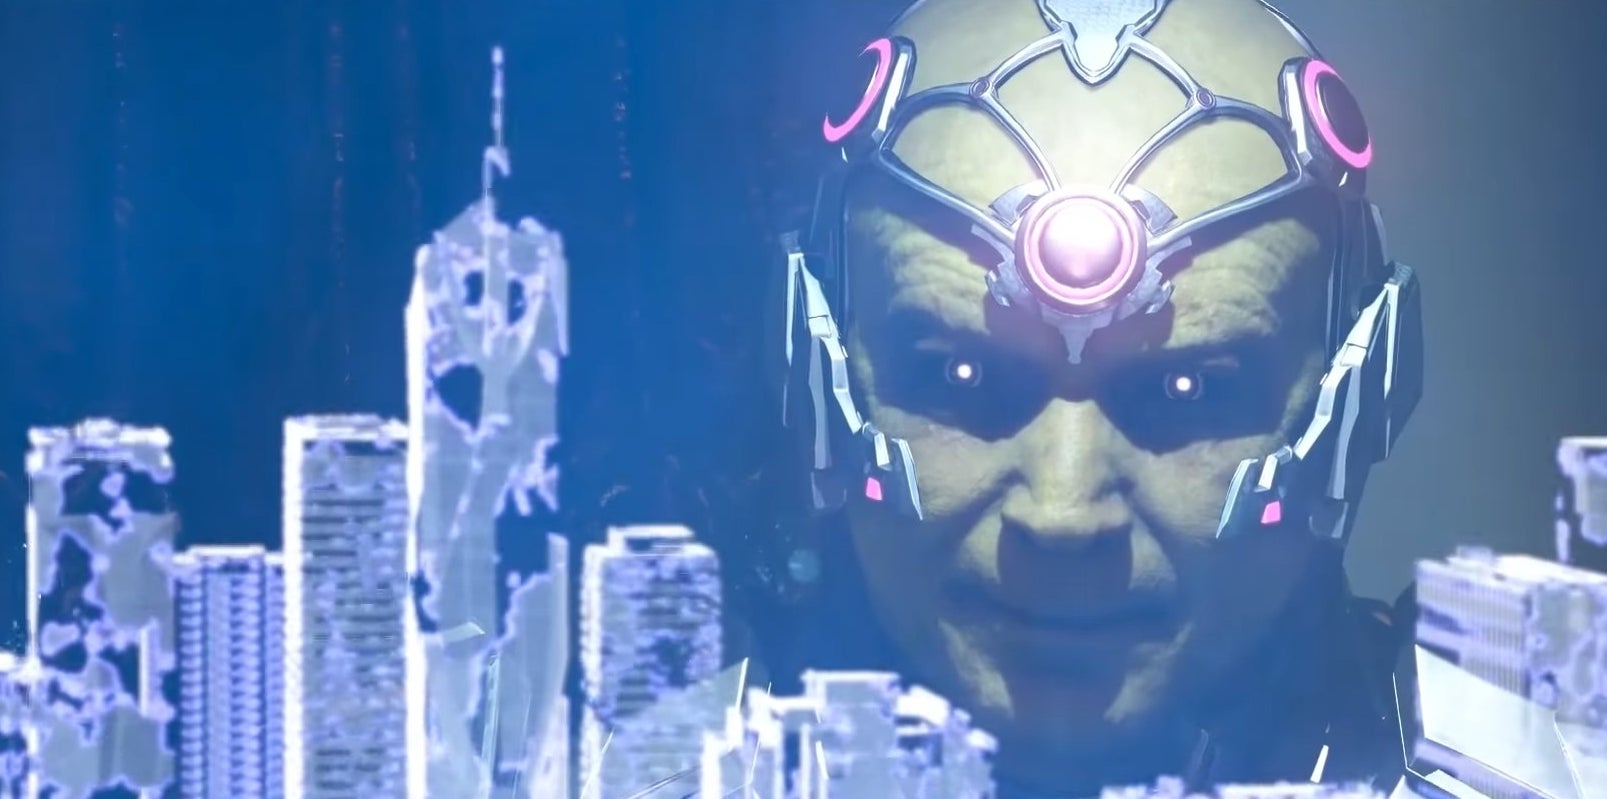 Brainiac looking at a shrunken city in "Injustice 2"